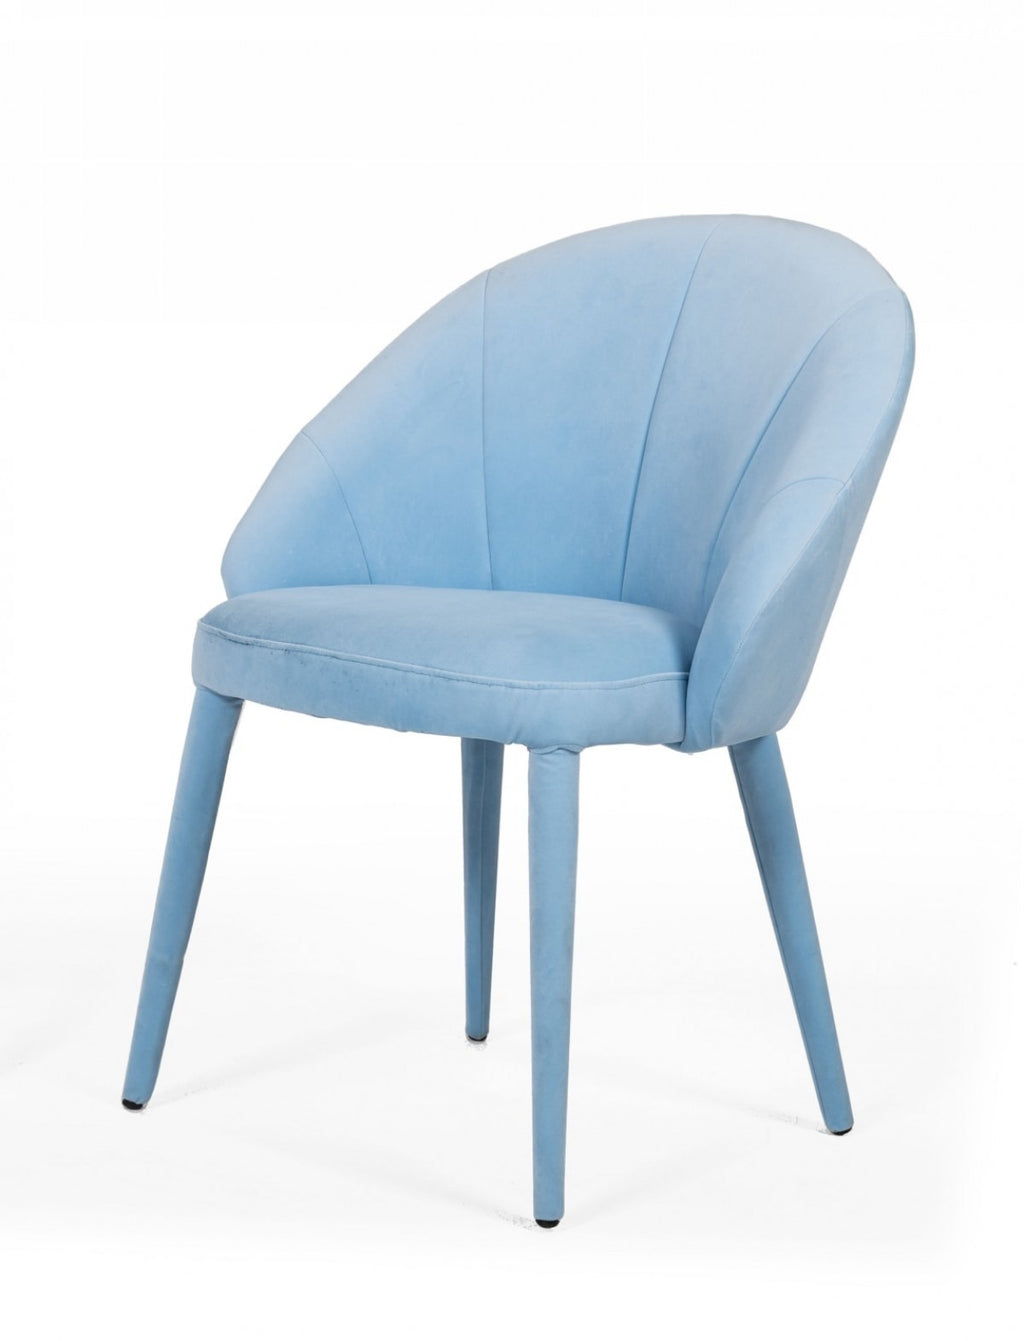 Blue Fabric Wrapped Dining Chair - 99fab 